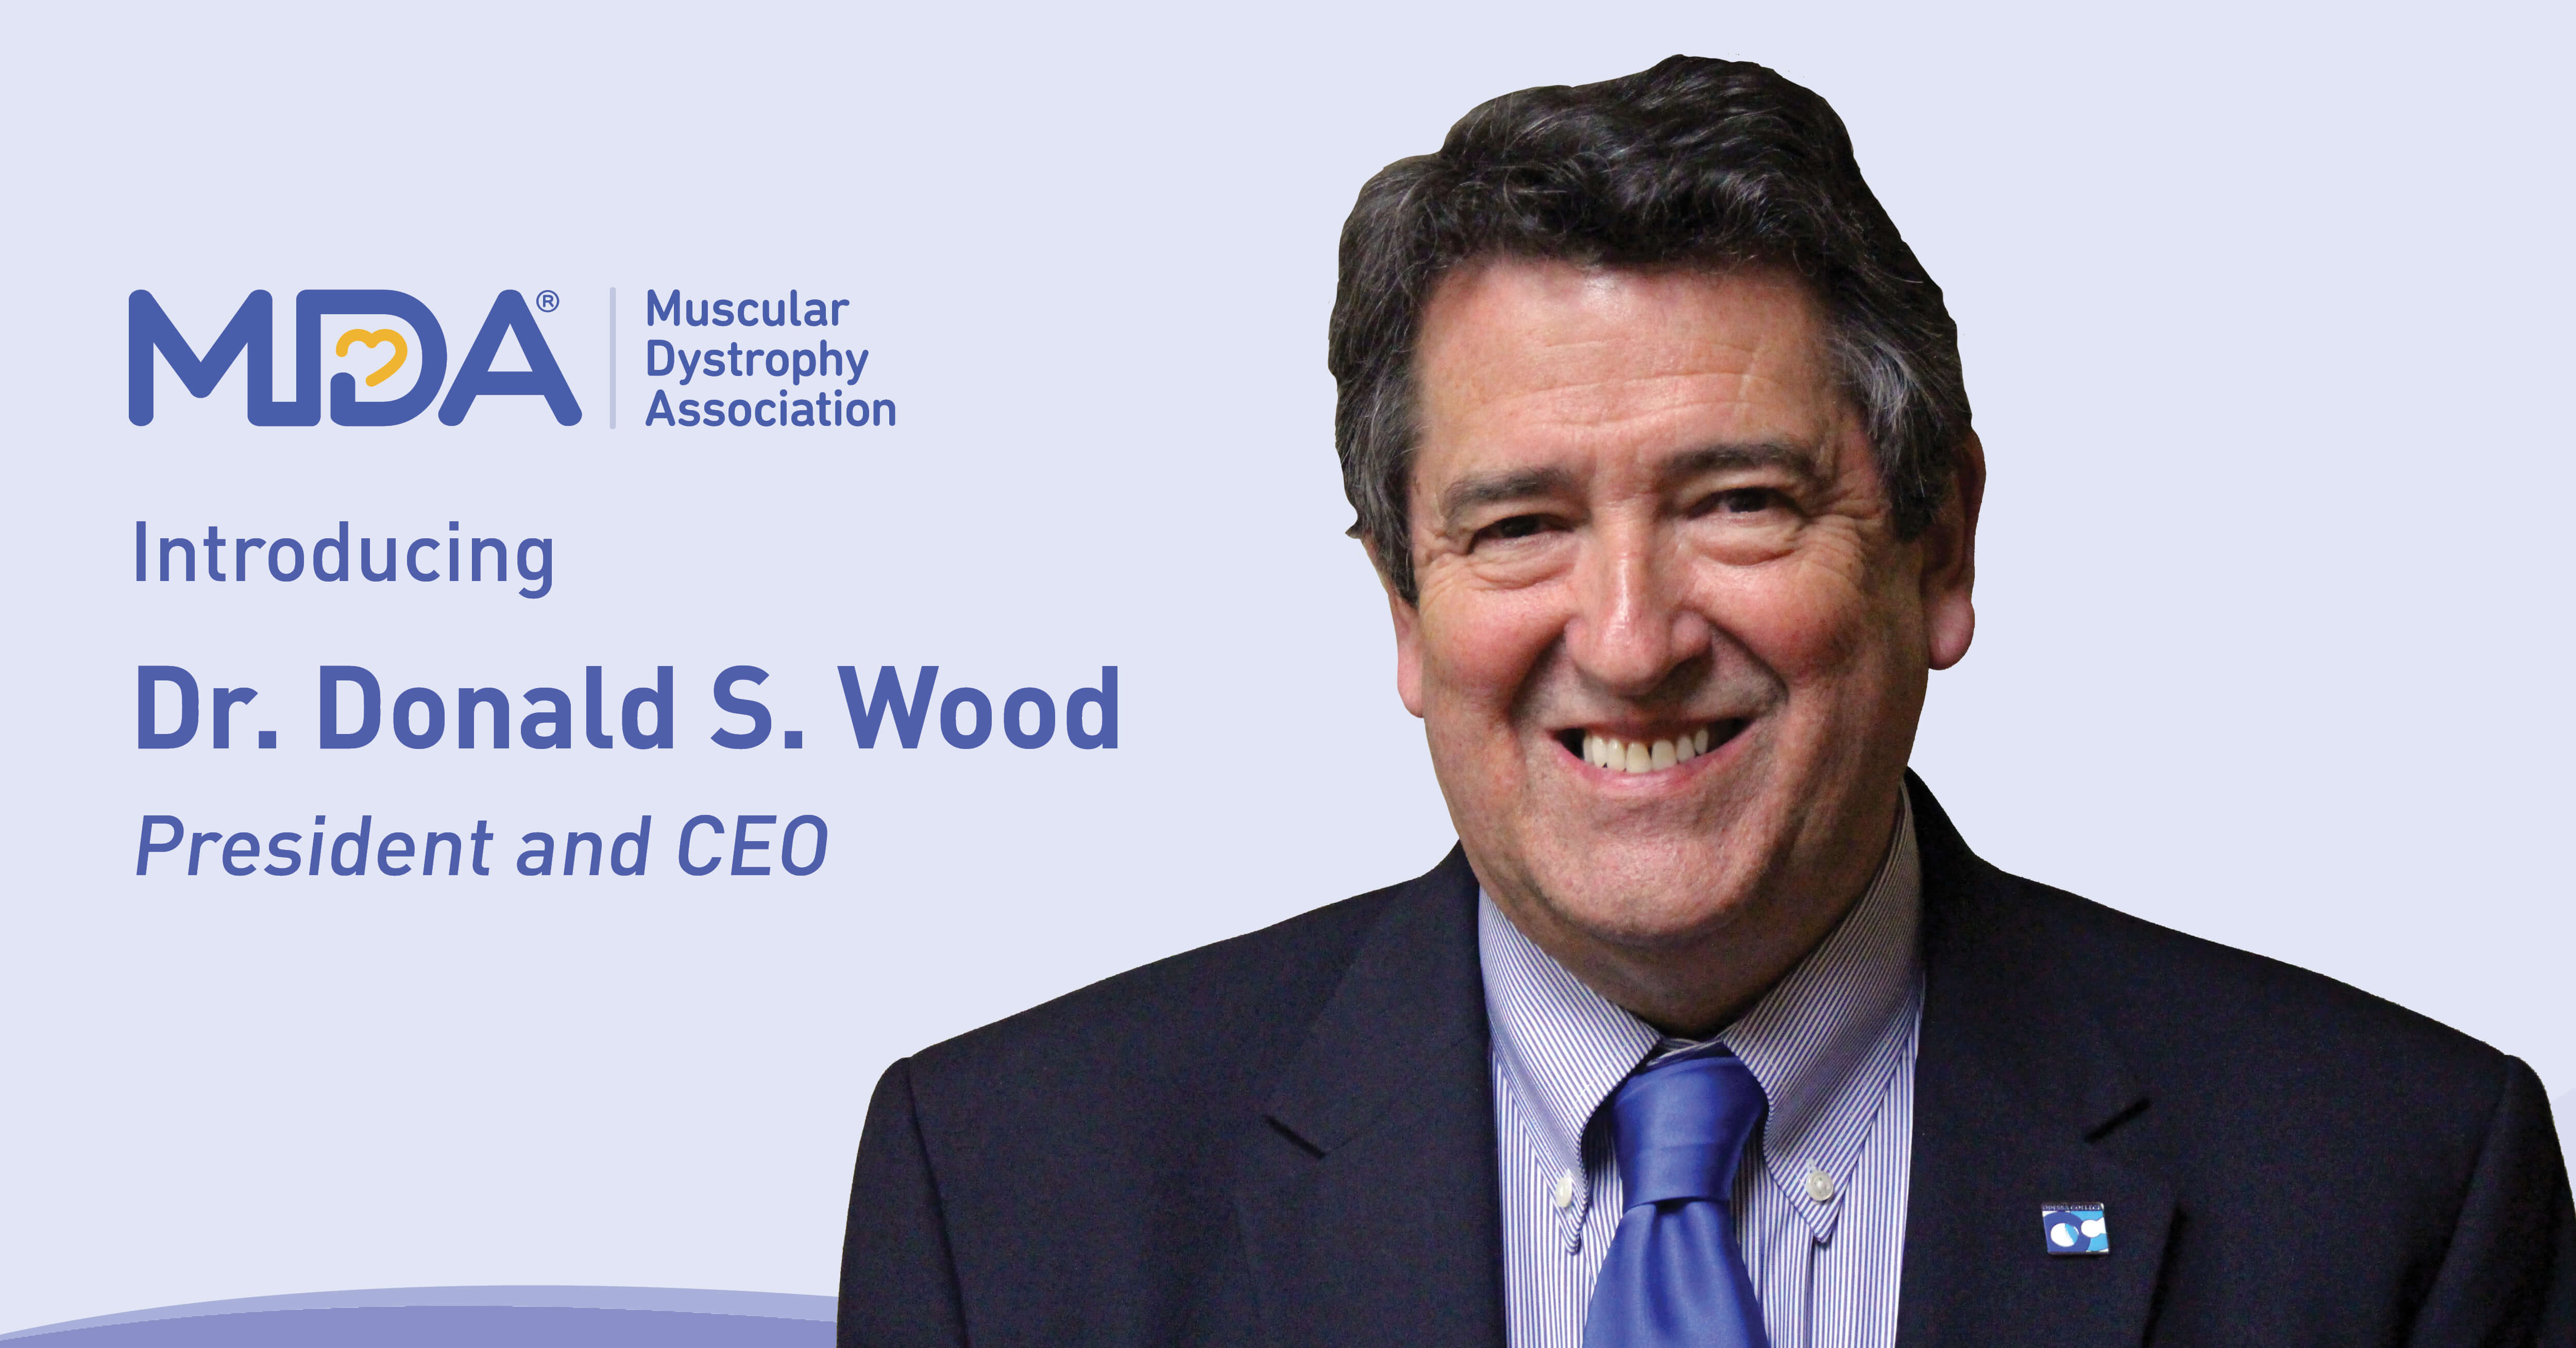 Introducing Dr. Donald S. Wood, President and CEO.